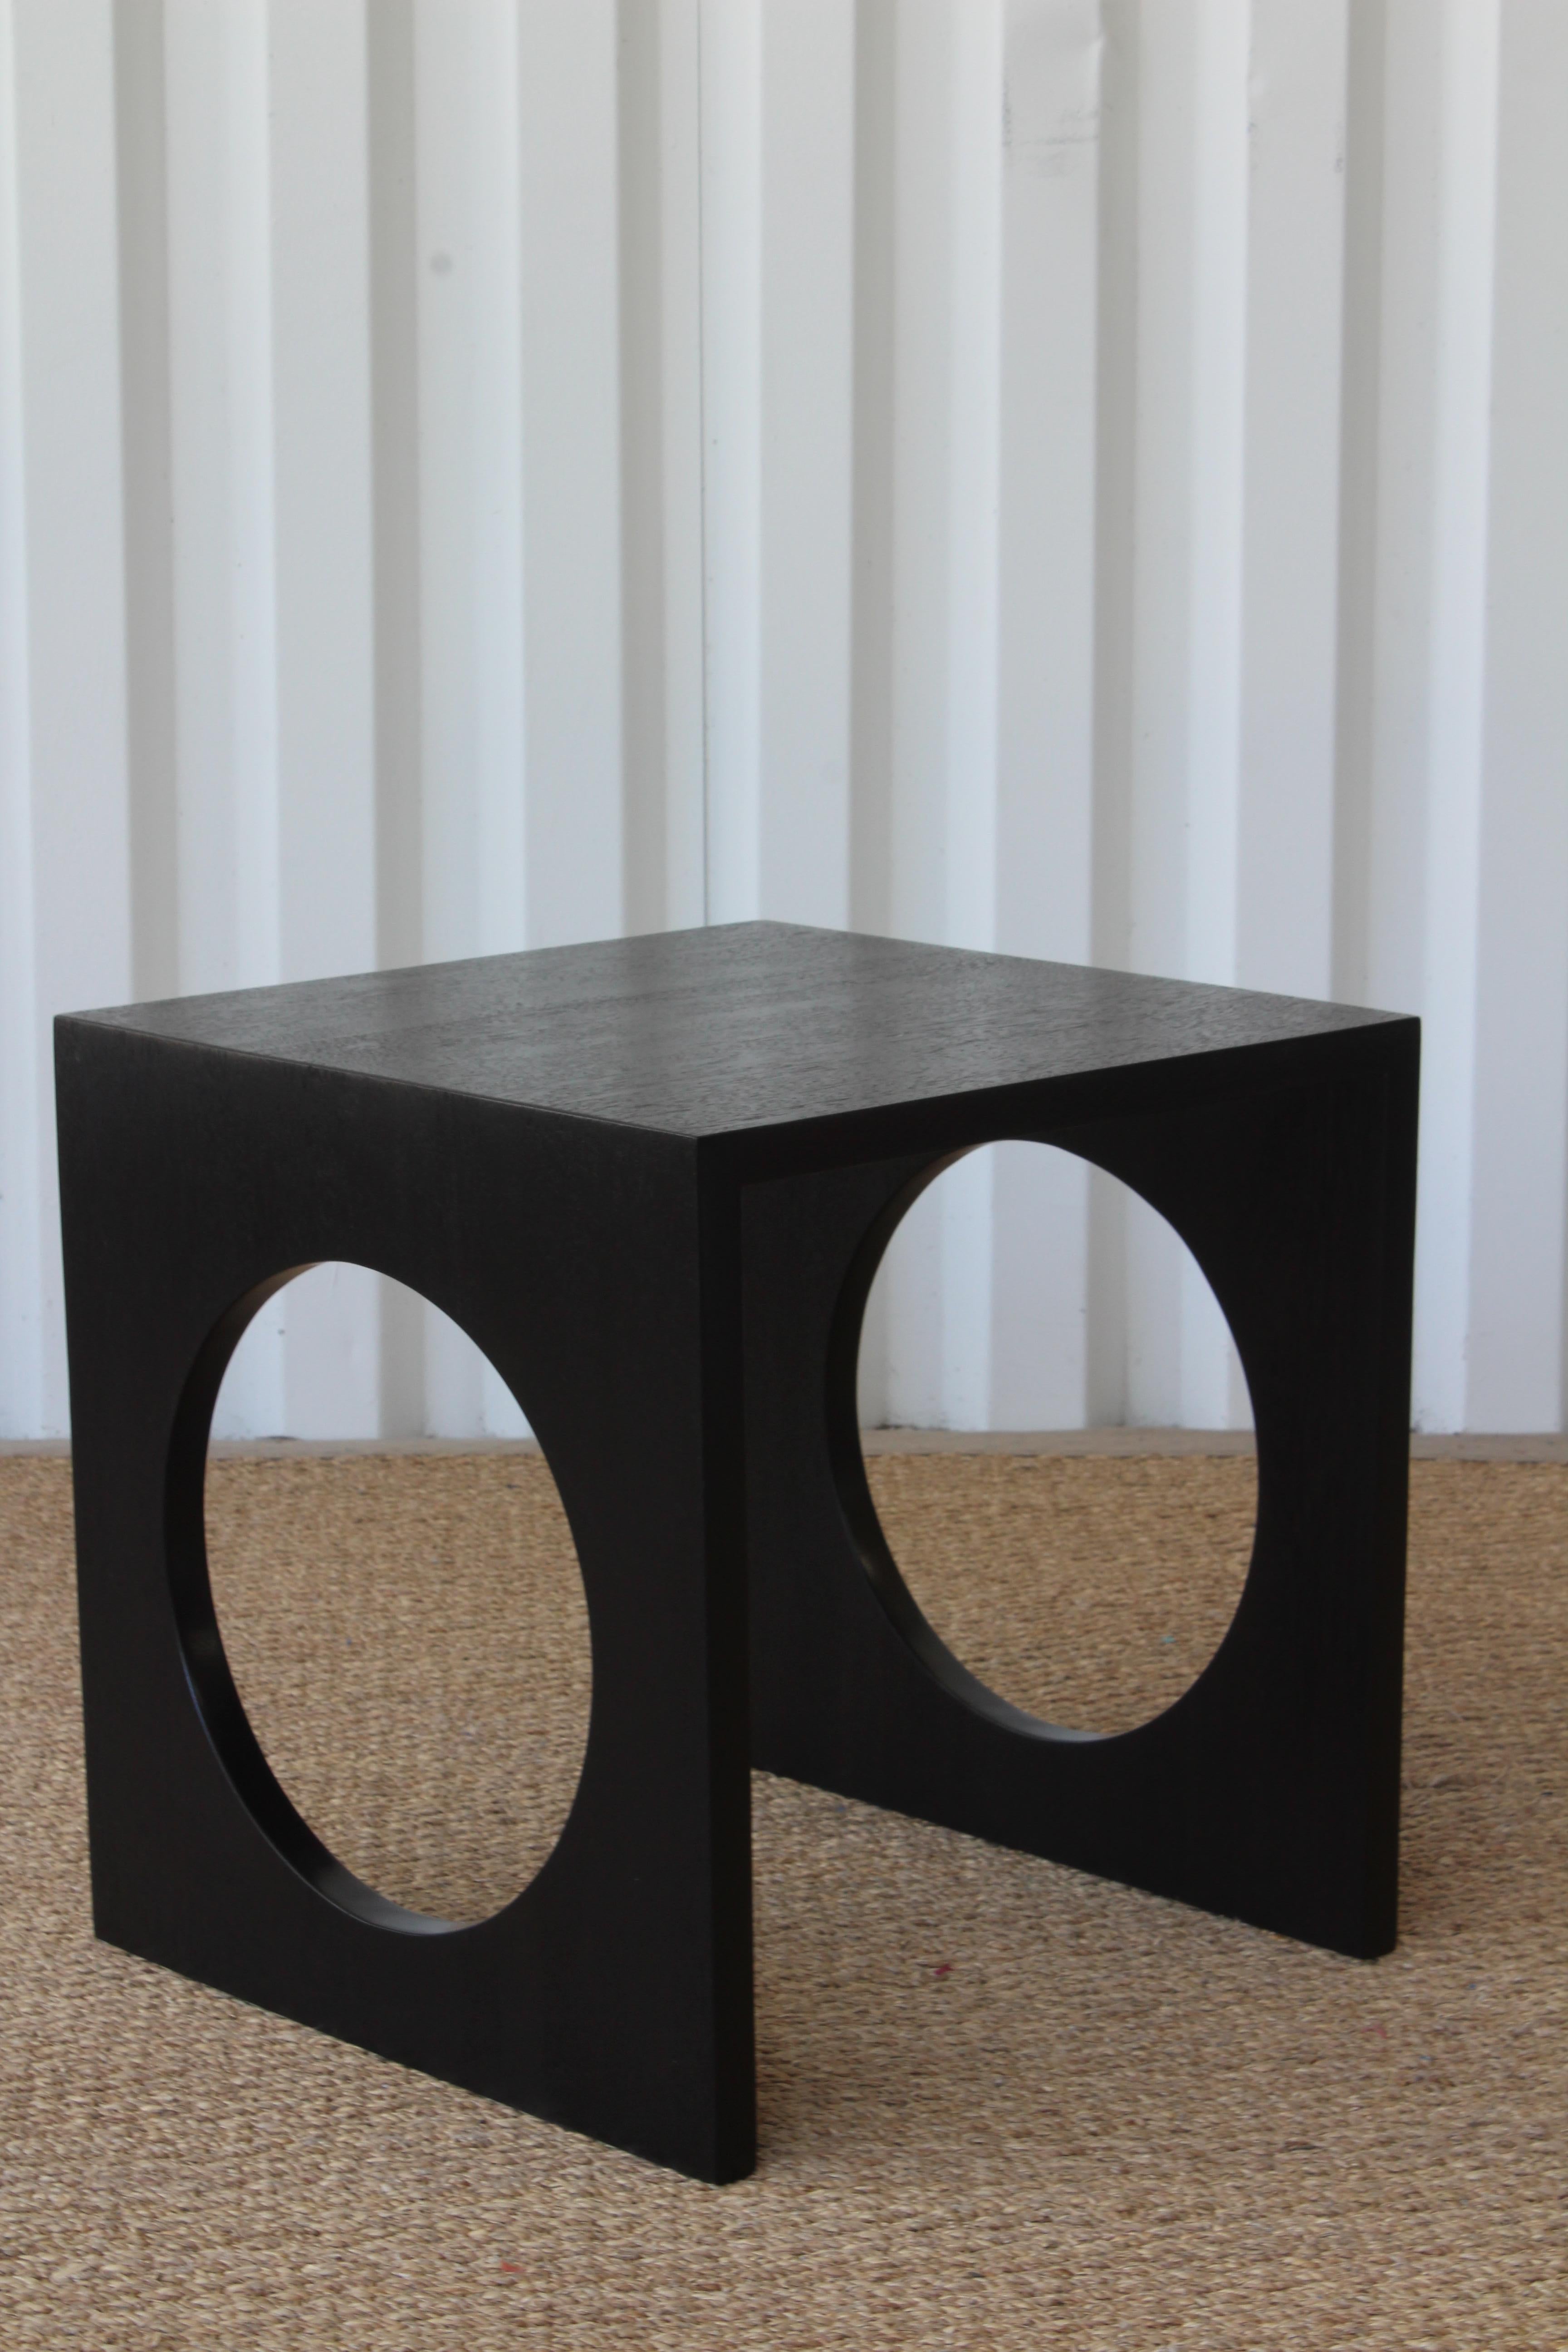 Vintage 1960s side table with circle cutout, made from solid oak. Recently refinished in satin black.